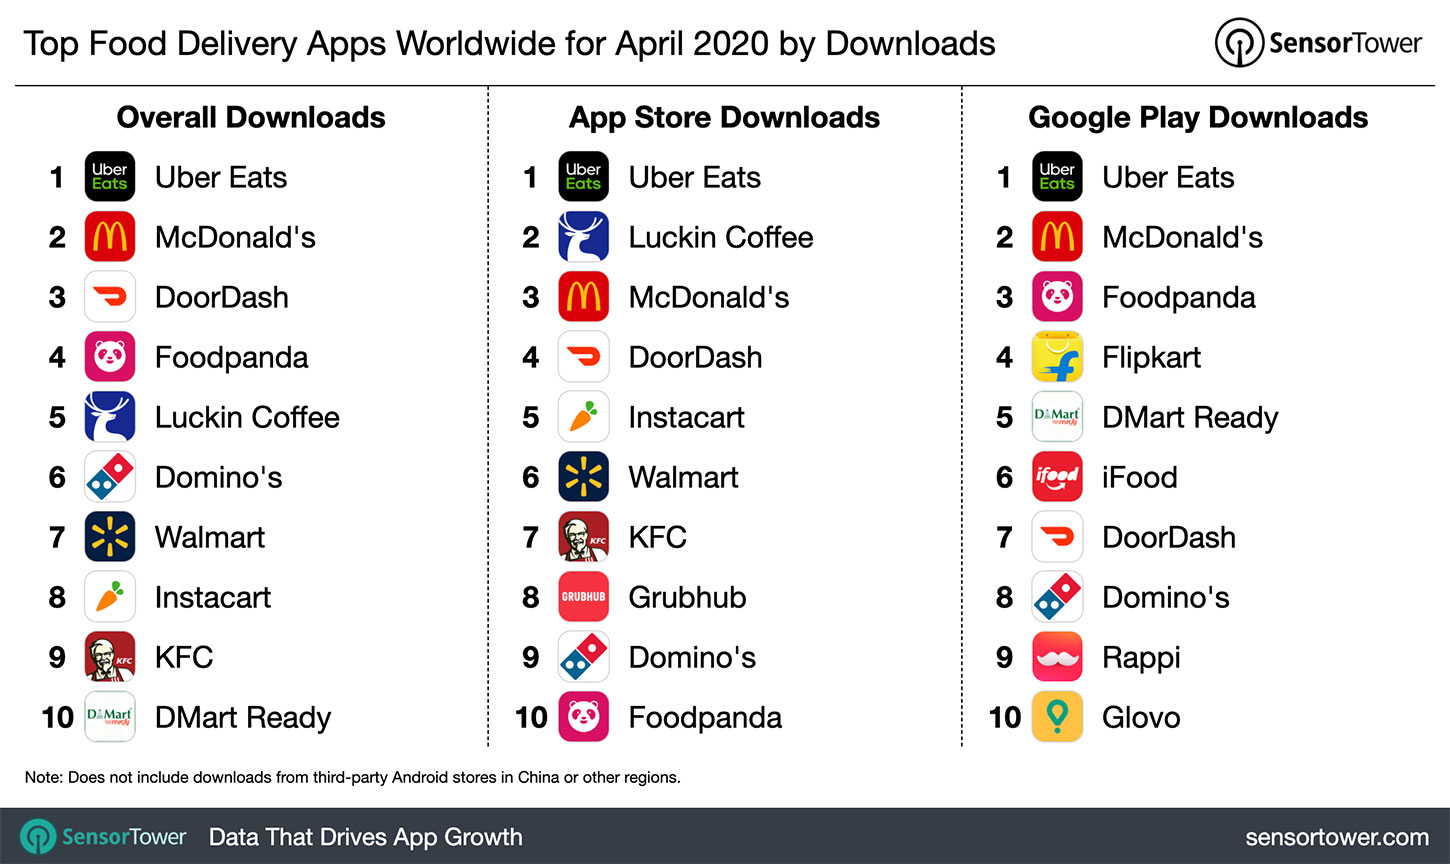 Top Food Delivery Apps Worldwide for April 2020 by Downloads